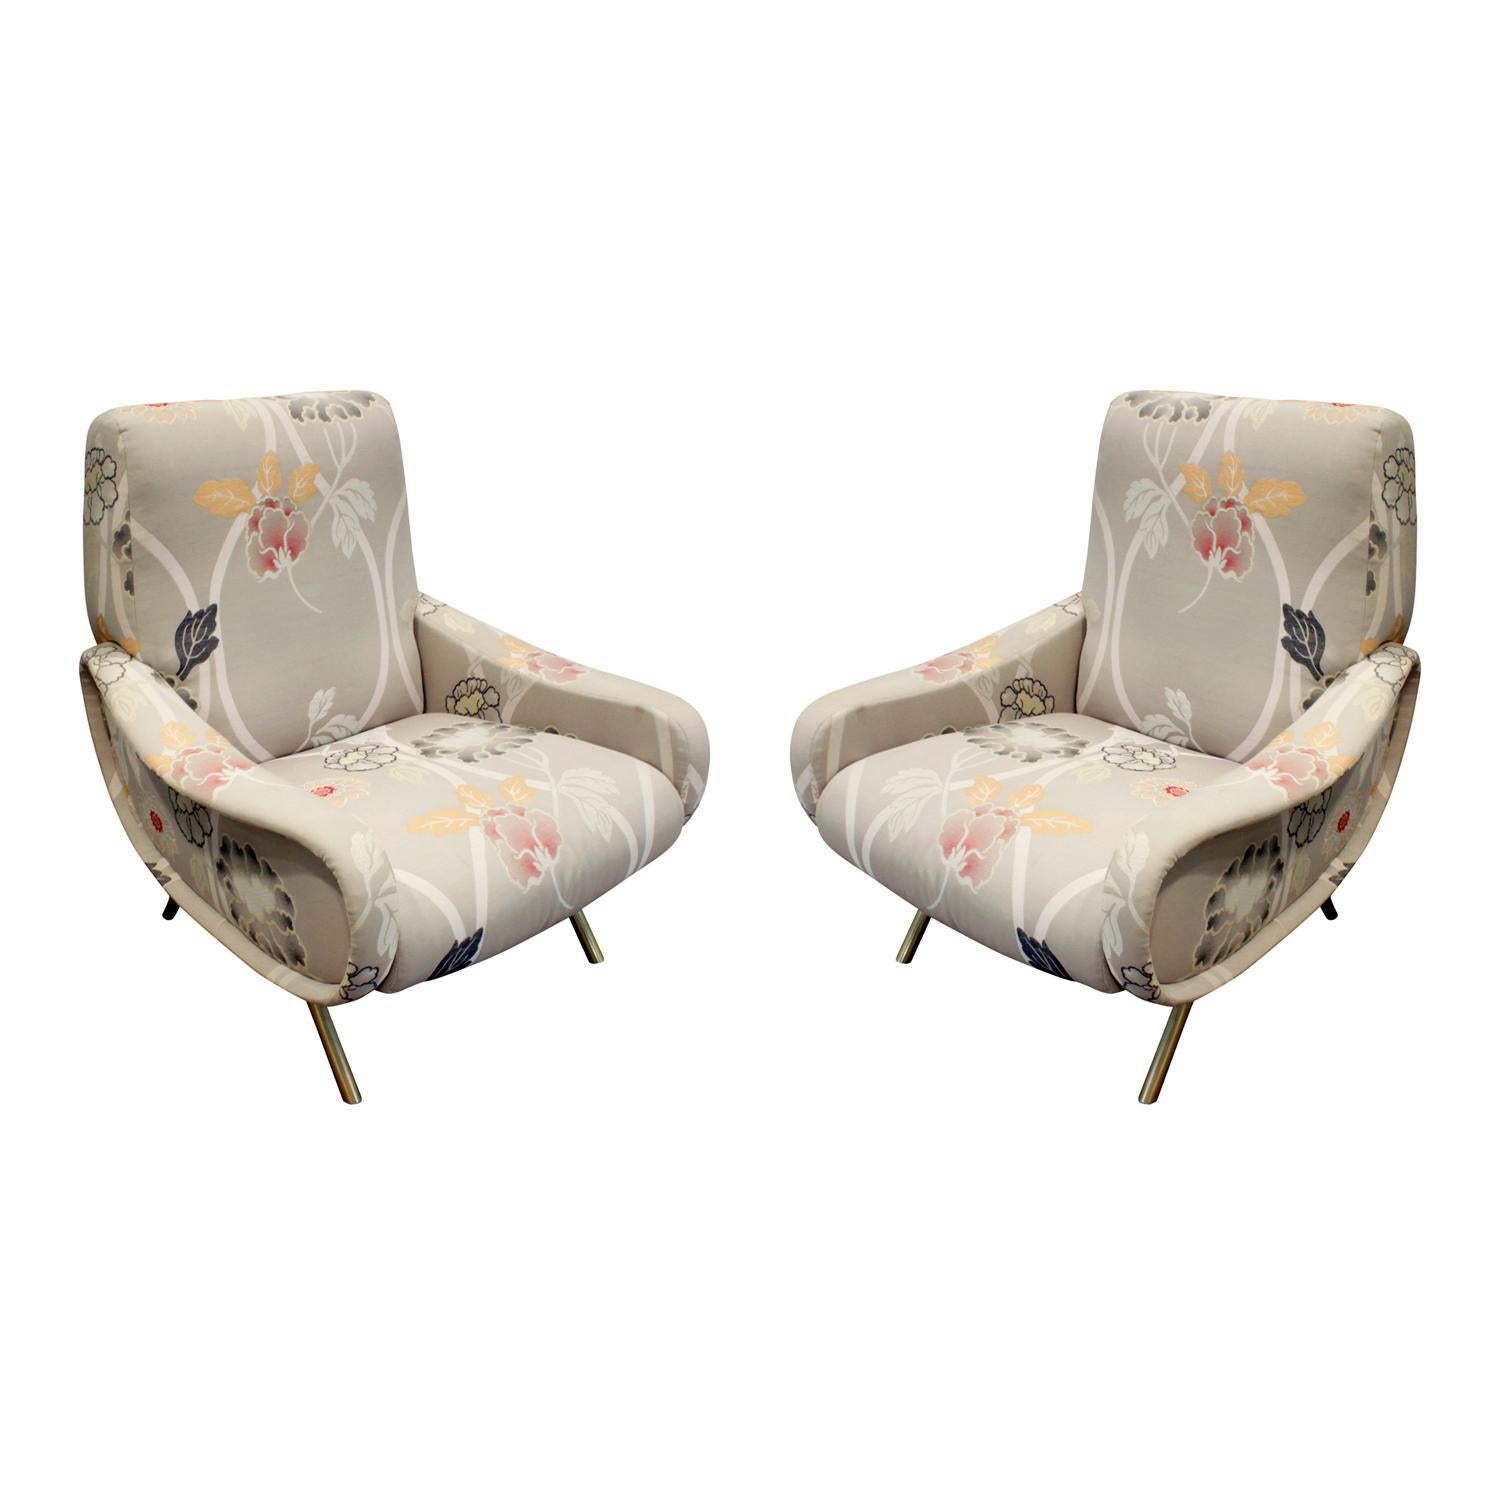 Pair of Sculptural Italian Lounge Chairs with Brass Legs, 1950s